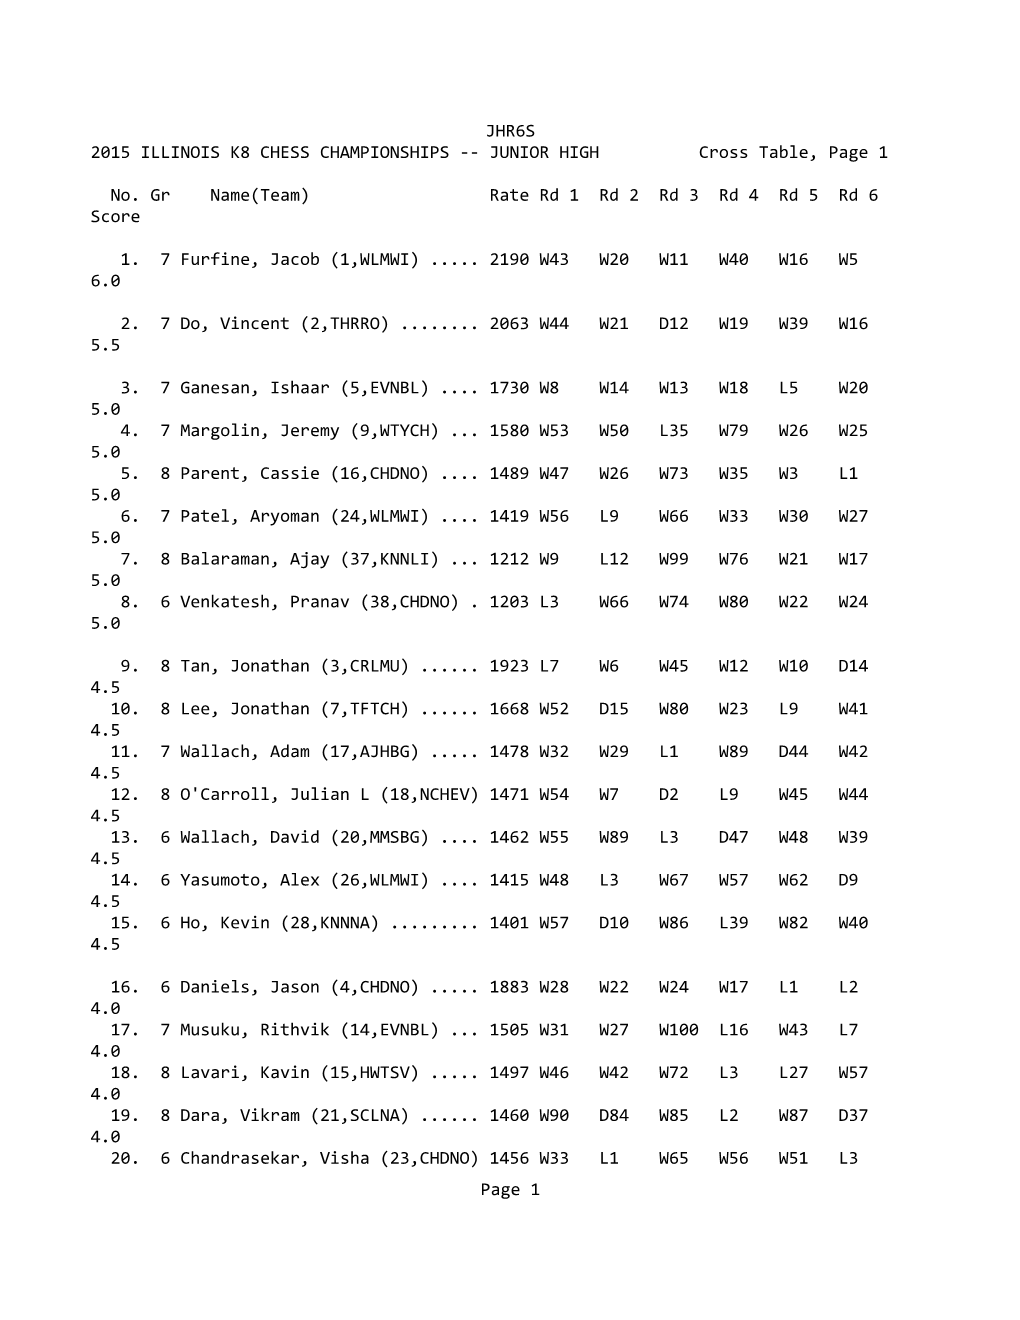 JHR6S 2015 ILLINOIS K8 CHESS CHAMPIONSHIPS -- JUNIOR HIGH Cross Table, Page 1 No. Gr Name(Team)